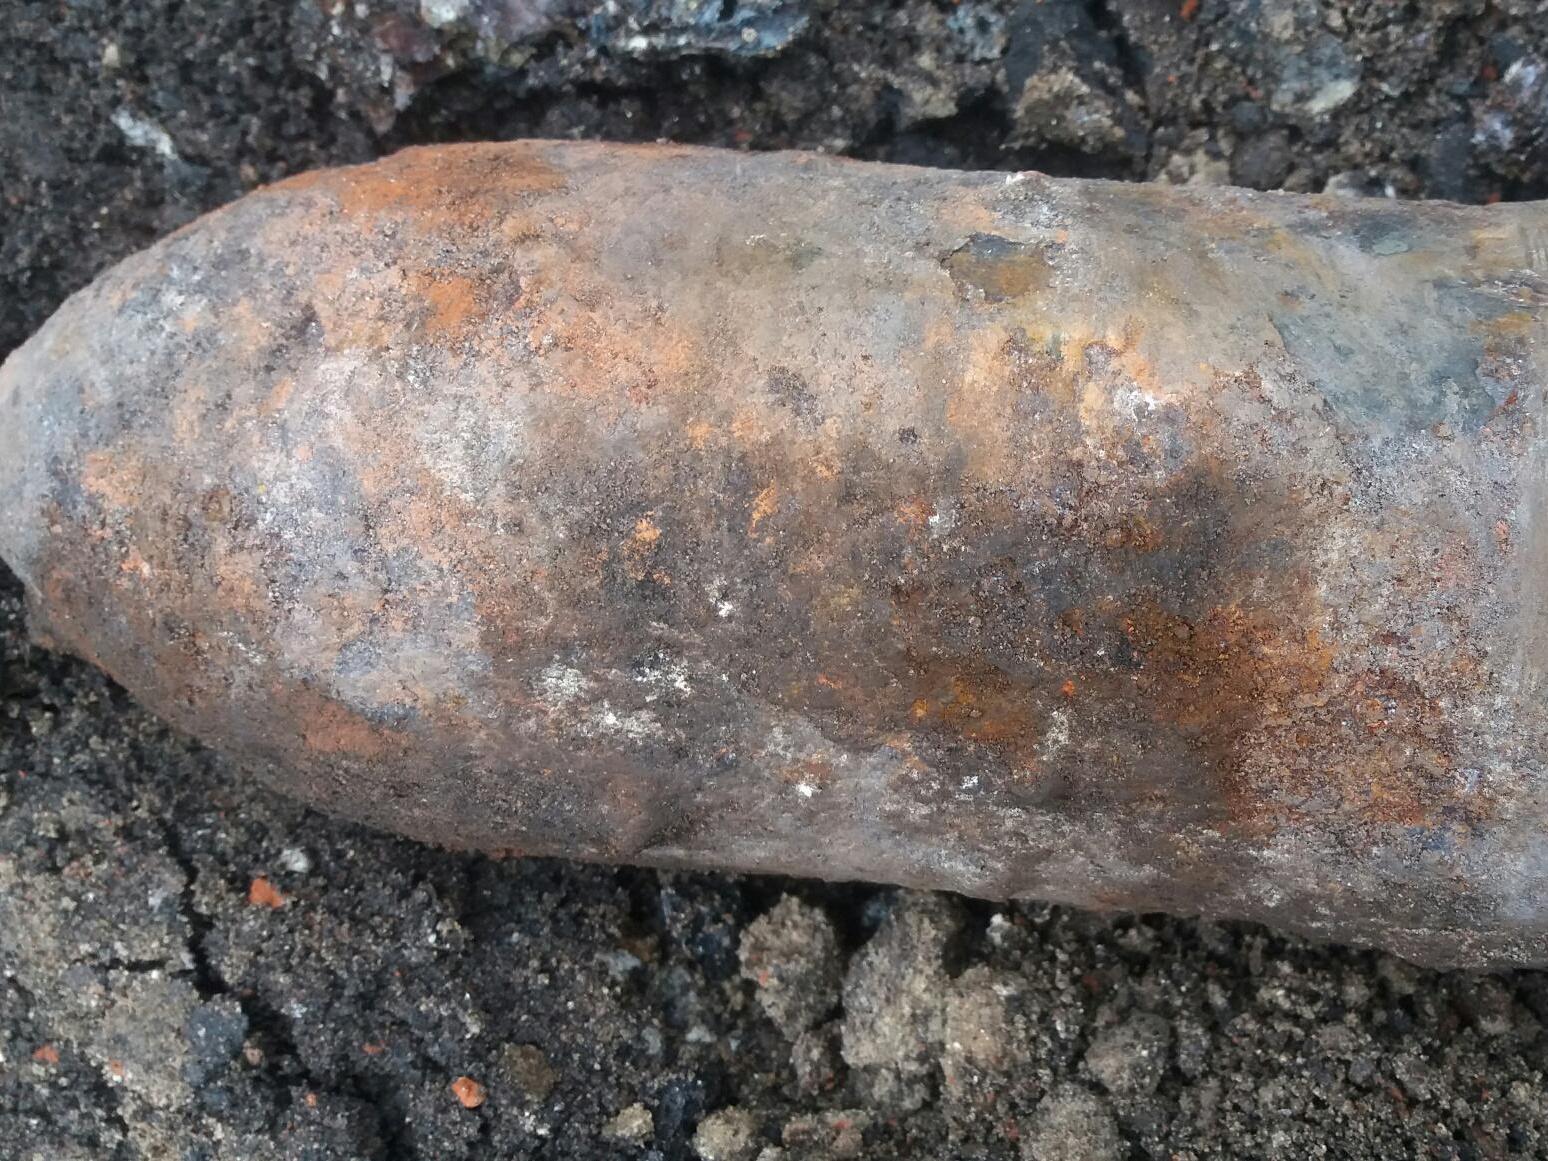 Police said the tank cartridge was believed to have been 'been there for some time'